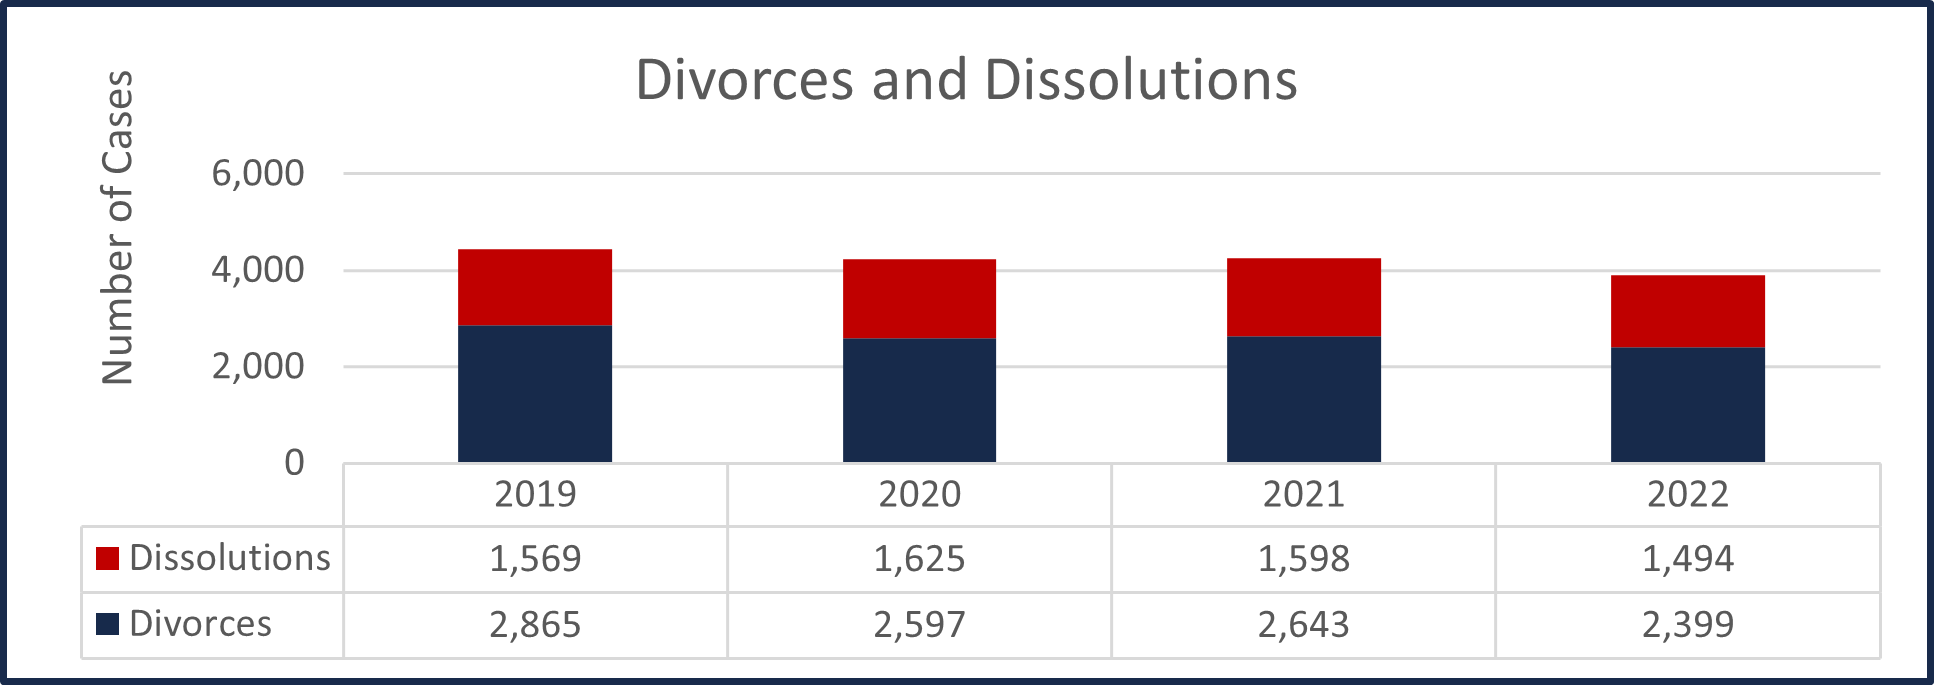 Divorces and Dissolutions